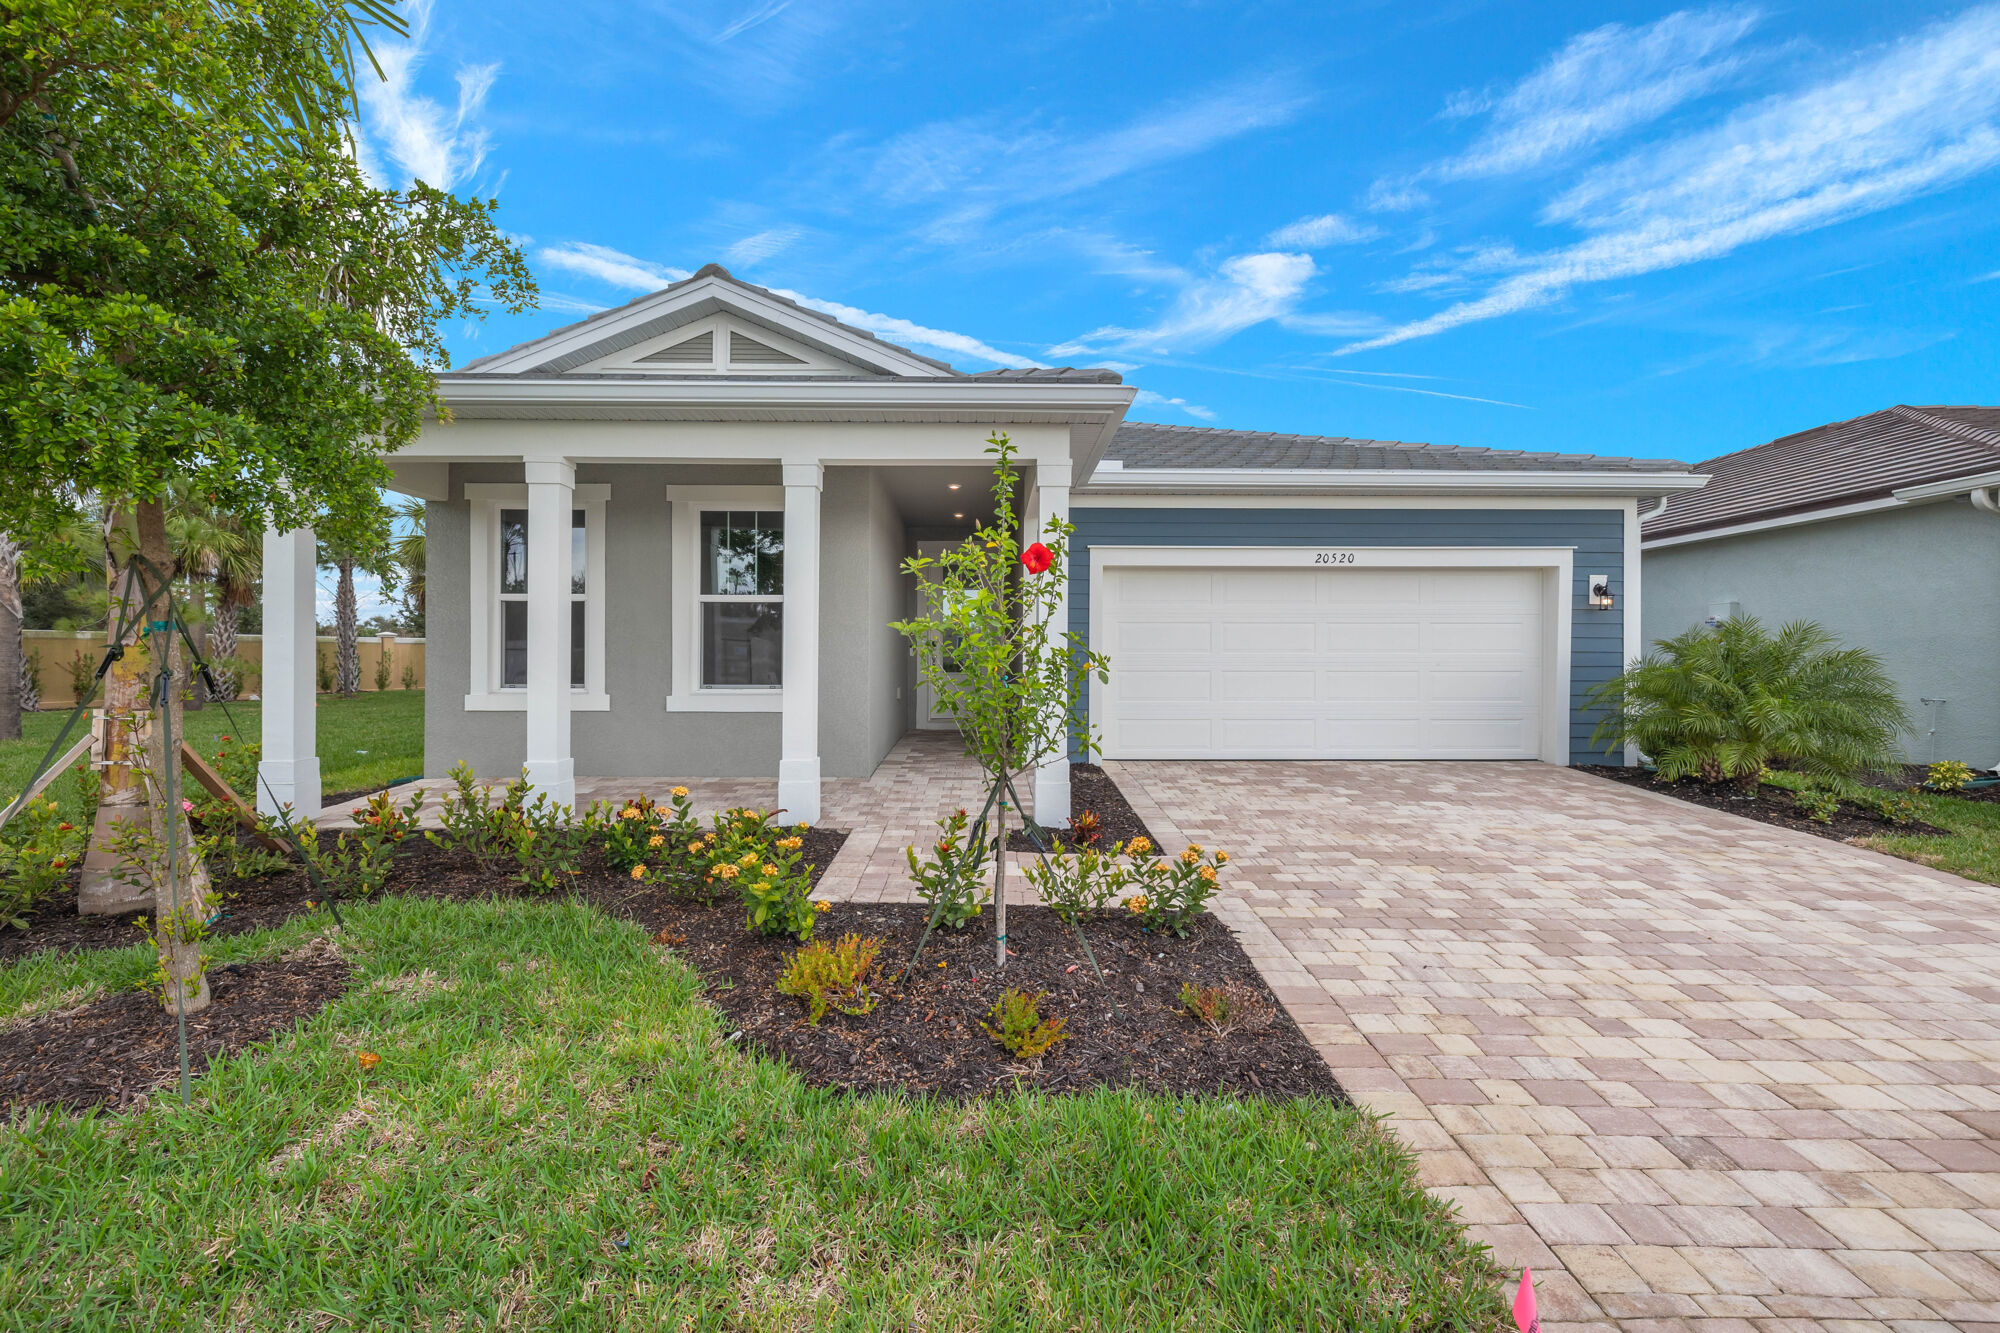 3 bedroom, 2 bathroom, study, 2 car garage, front porch, open dining, kitchen and Great Room. Walk-in pantry, Island Breakfast Bar, Plank Style Tile Flooring. Walk-in closet, Linen Closet in Owners Ensuite. Bedroom 2 and 3 share a full hall bath. 